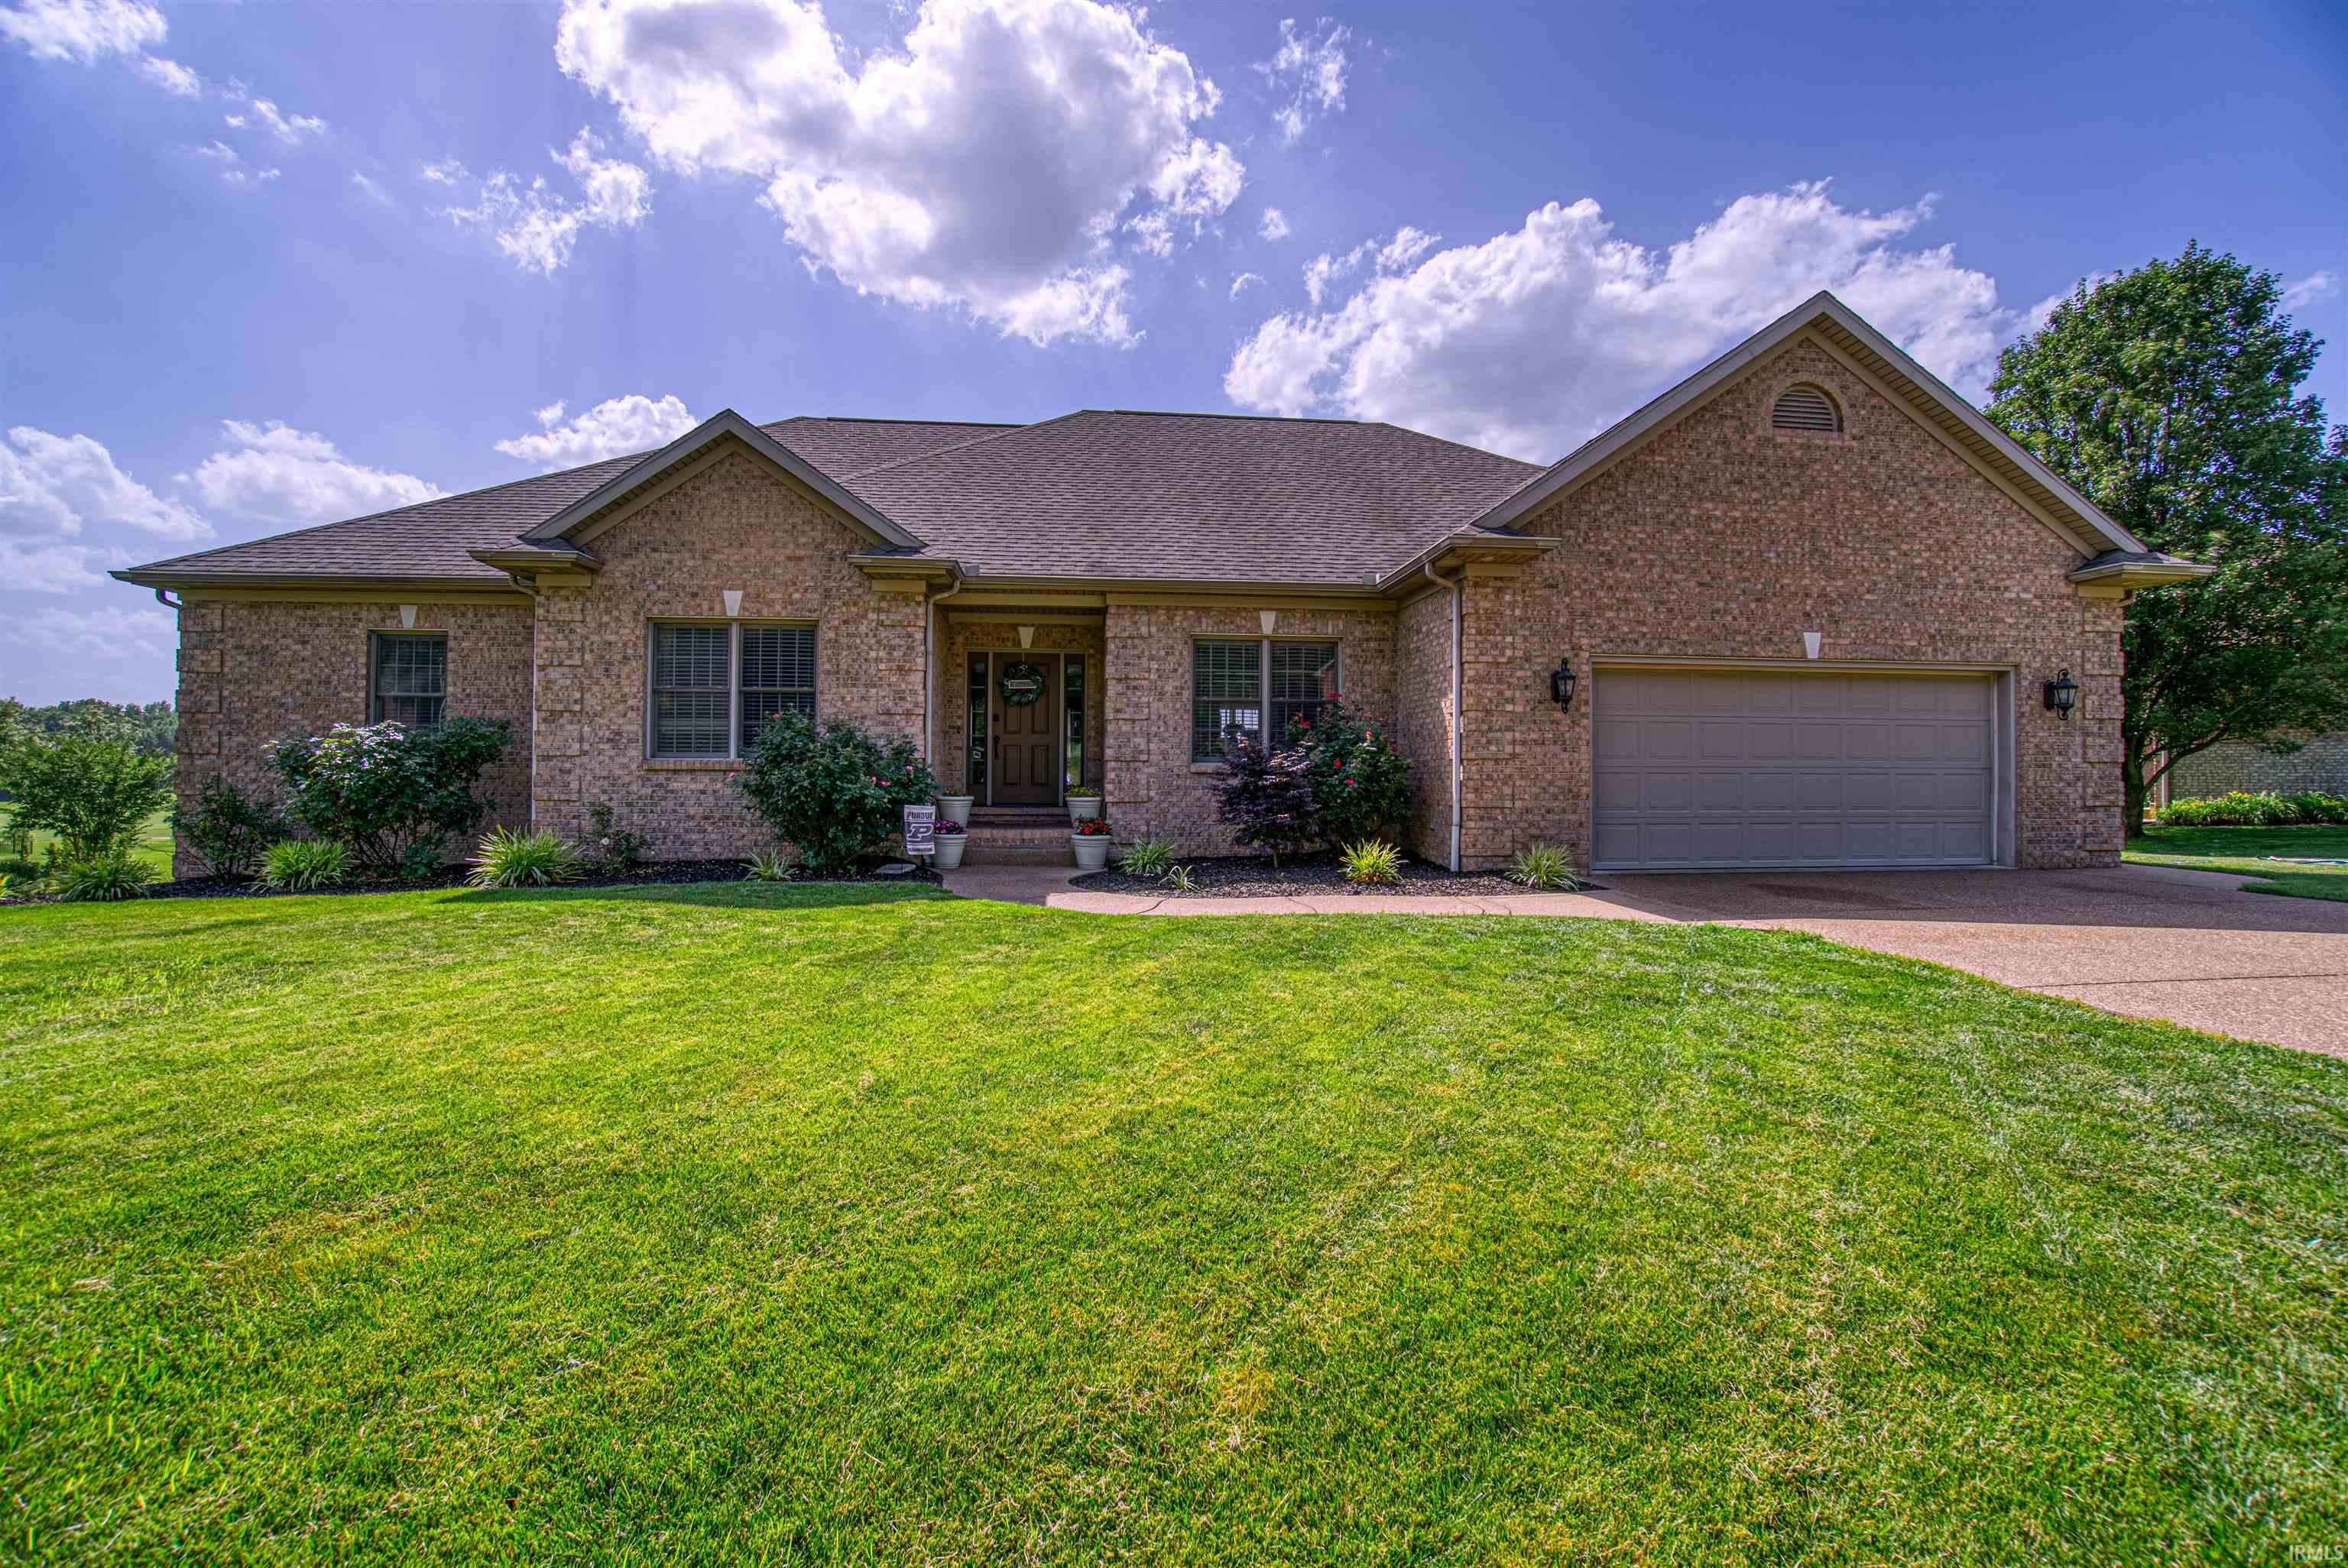 133 Quail Crossing Drive, Boonville, IN 47601